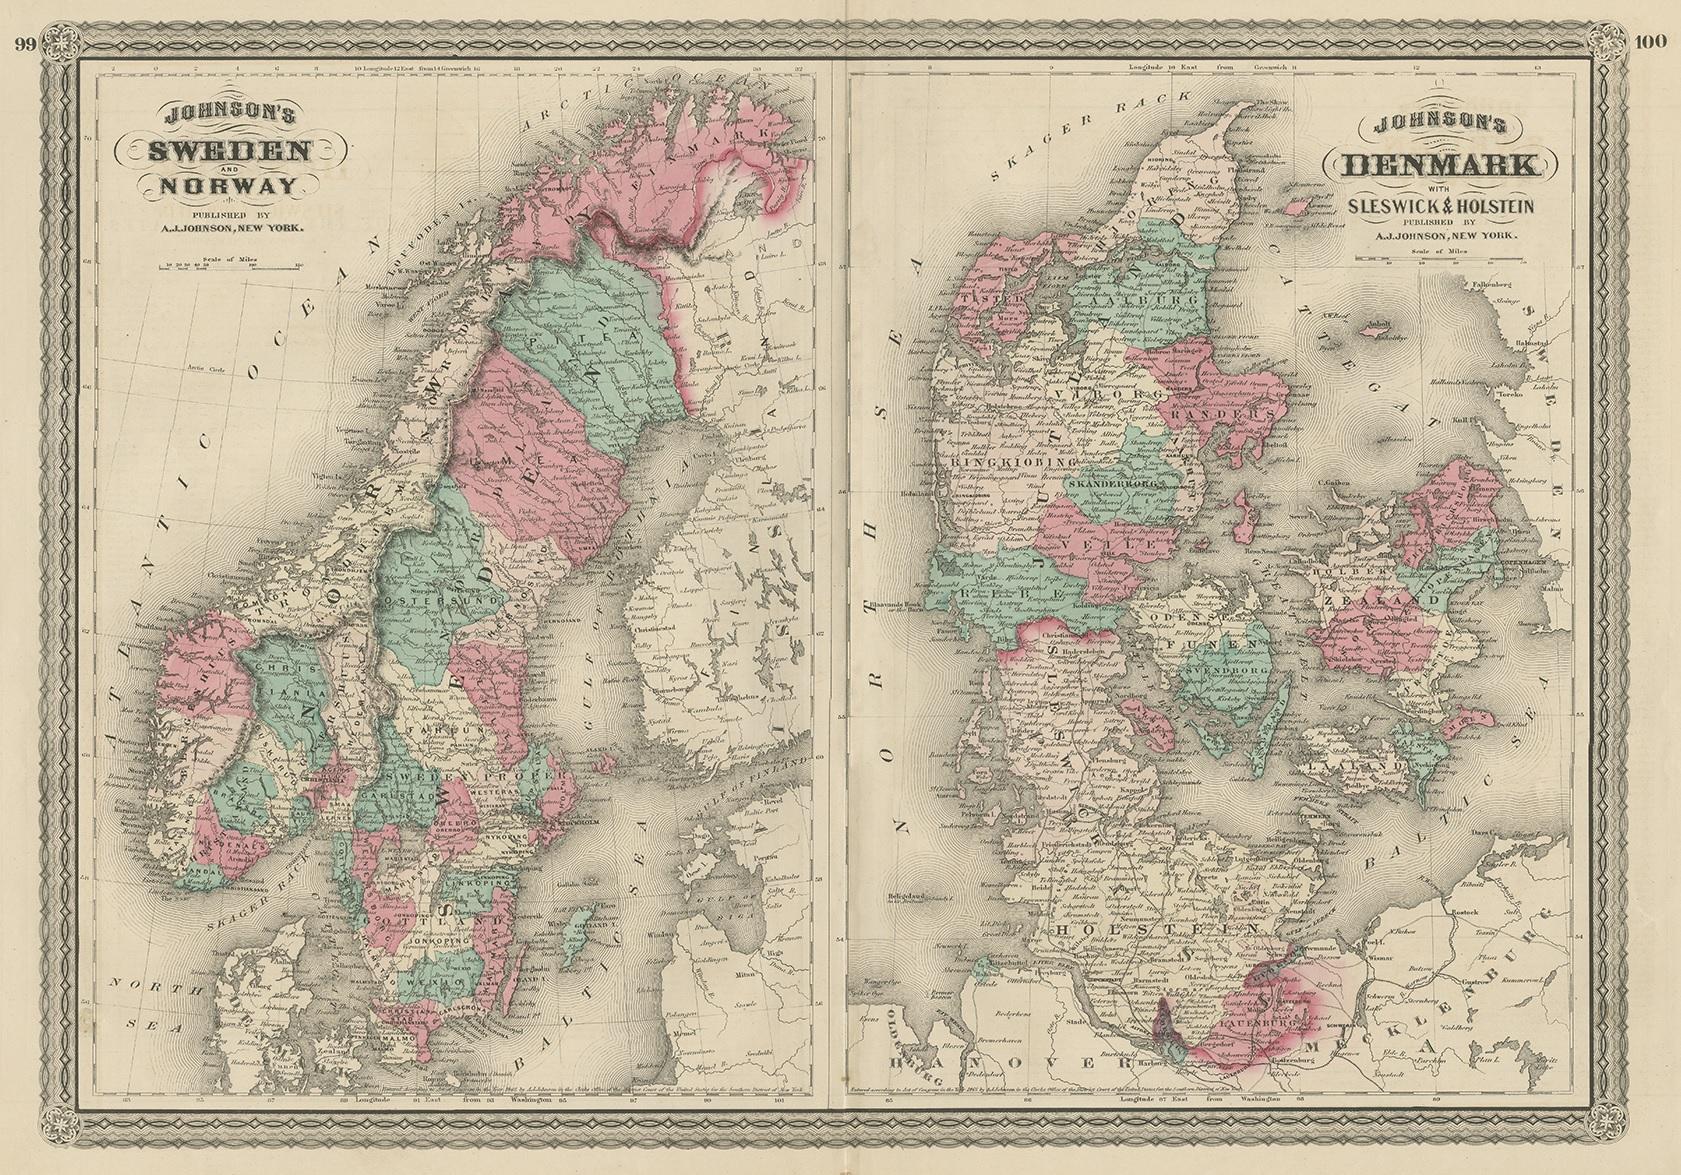 The image is an antique map, a two-page spread from 